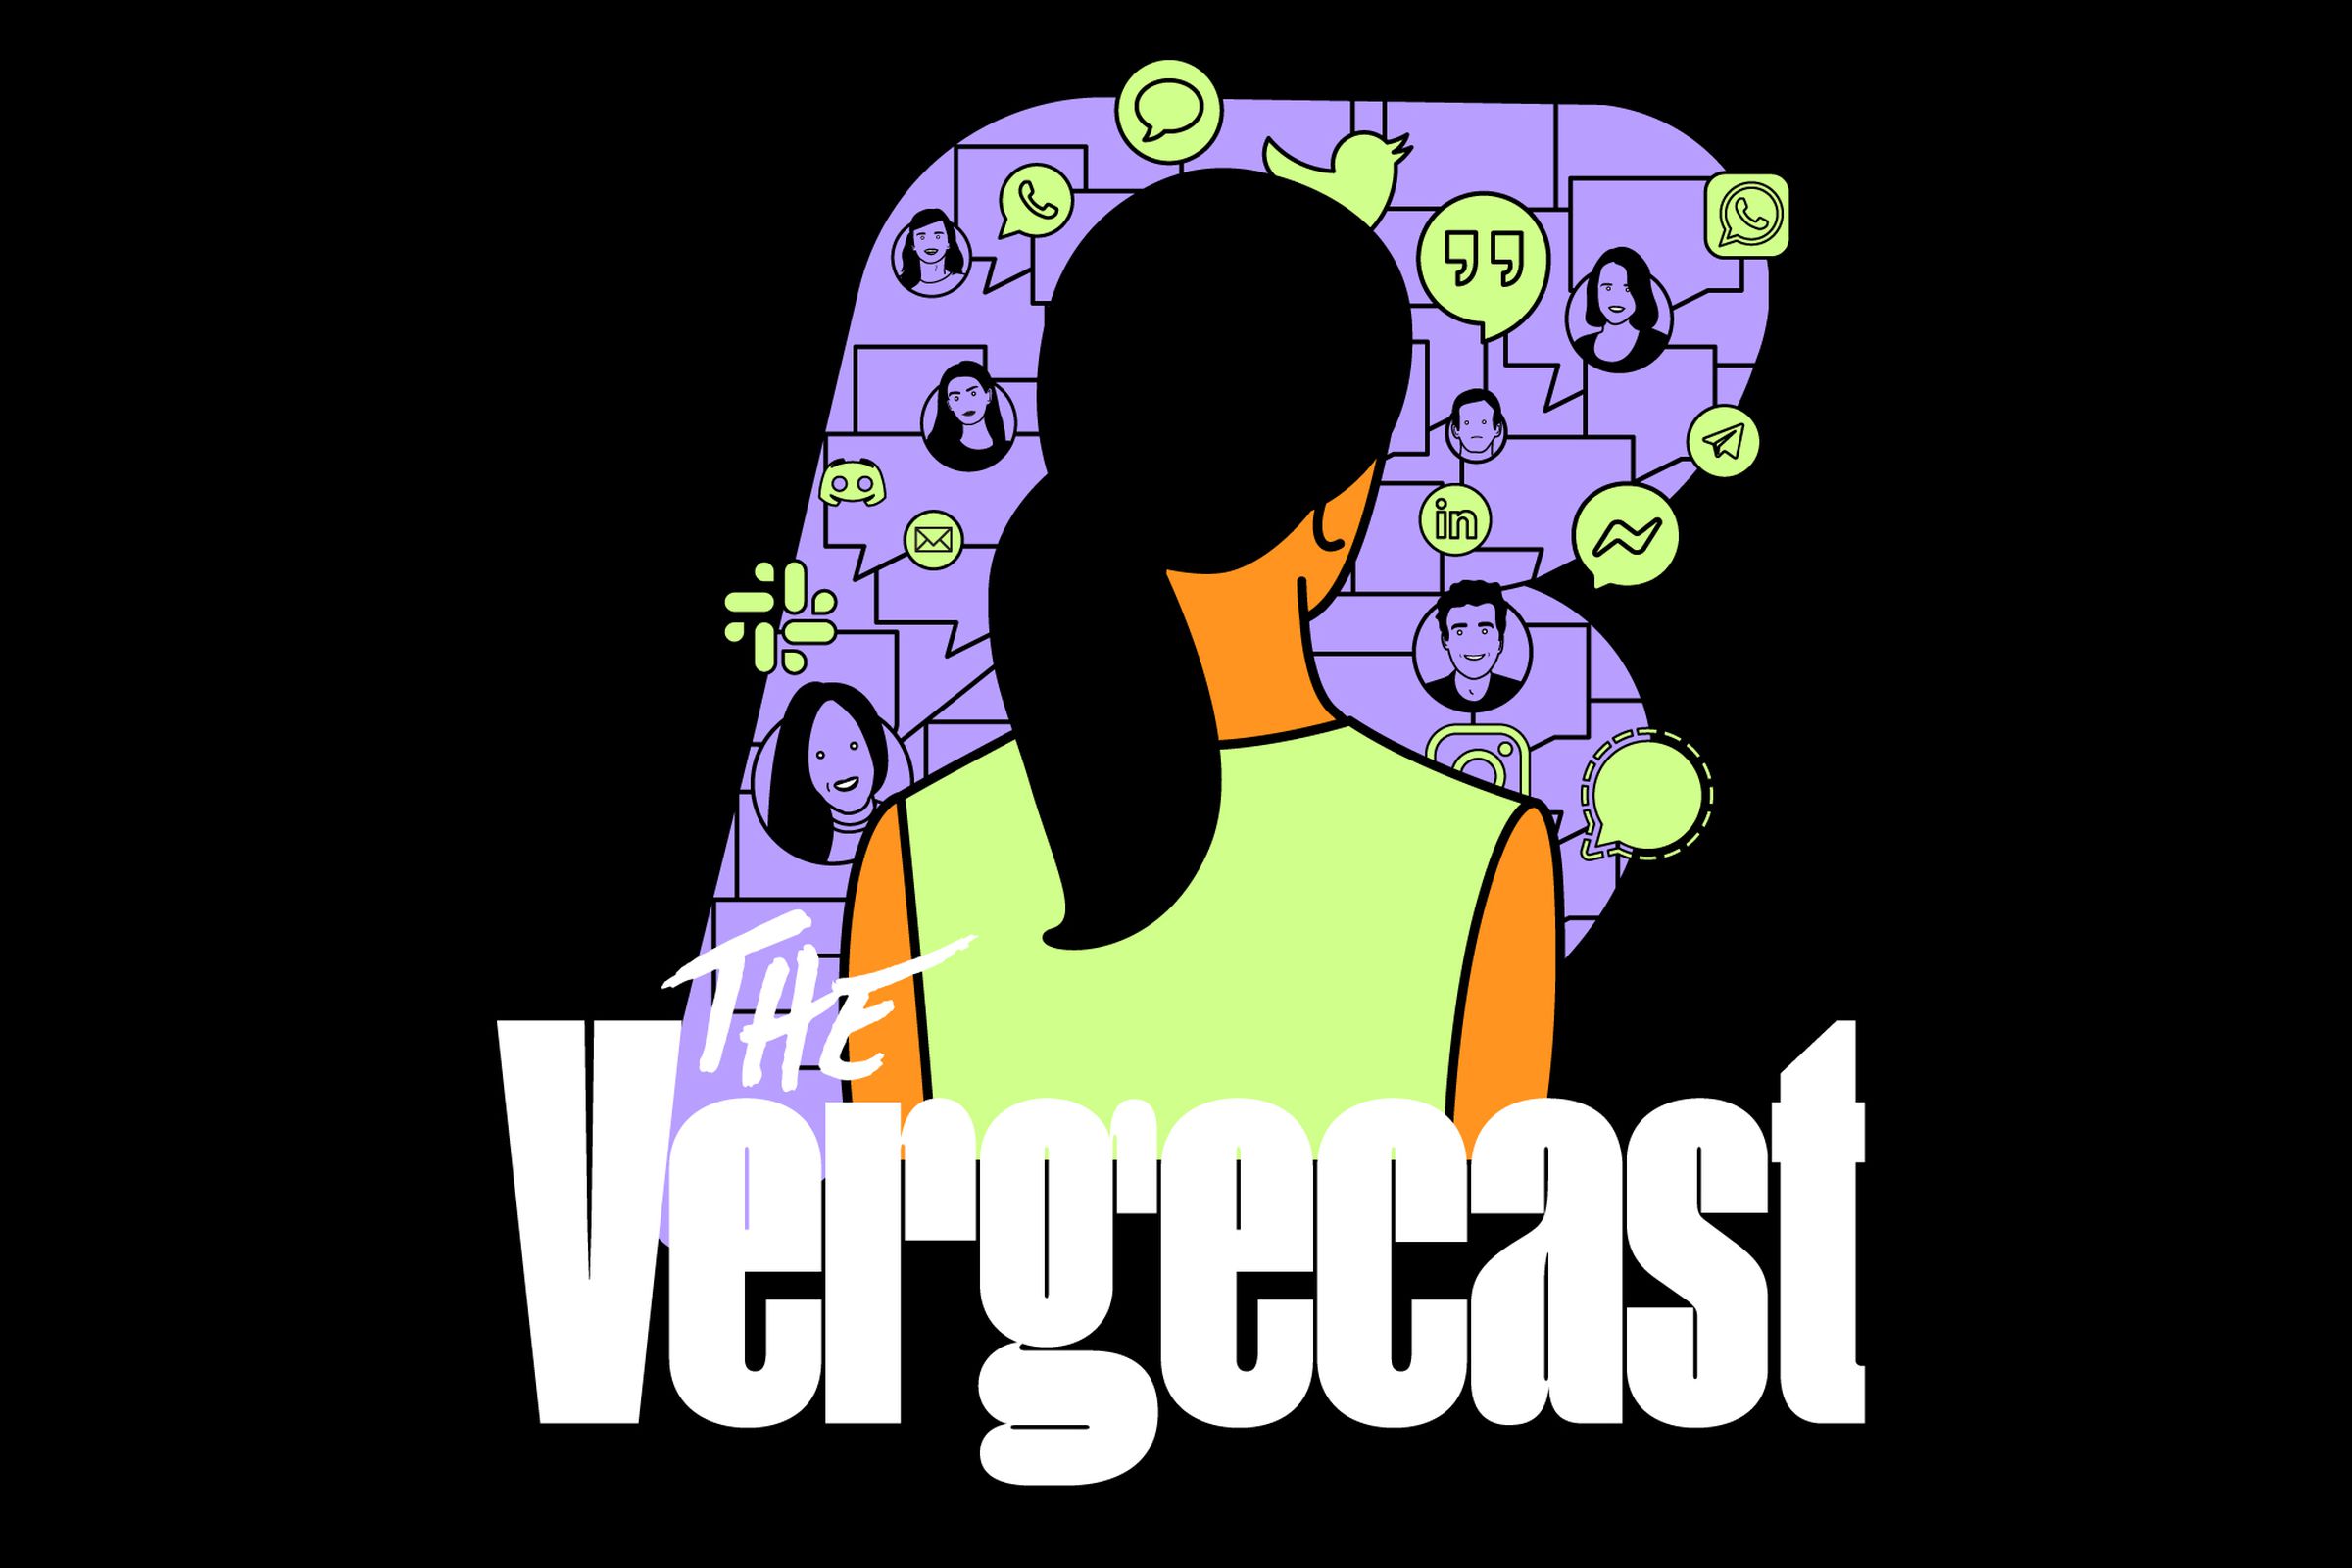 The Vergecast logo illustrated in front of a Beeper icon.